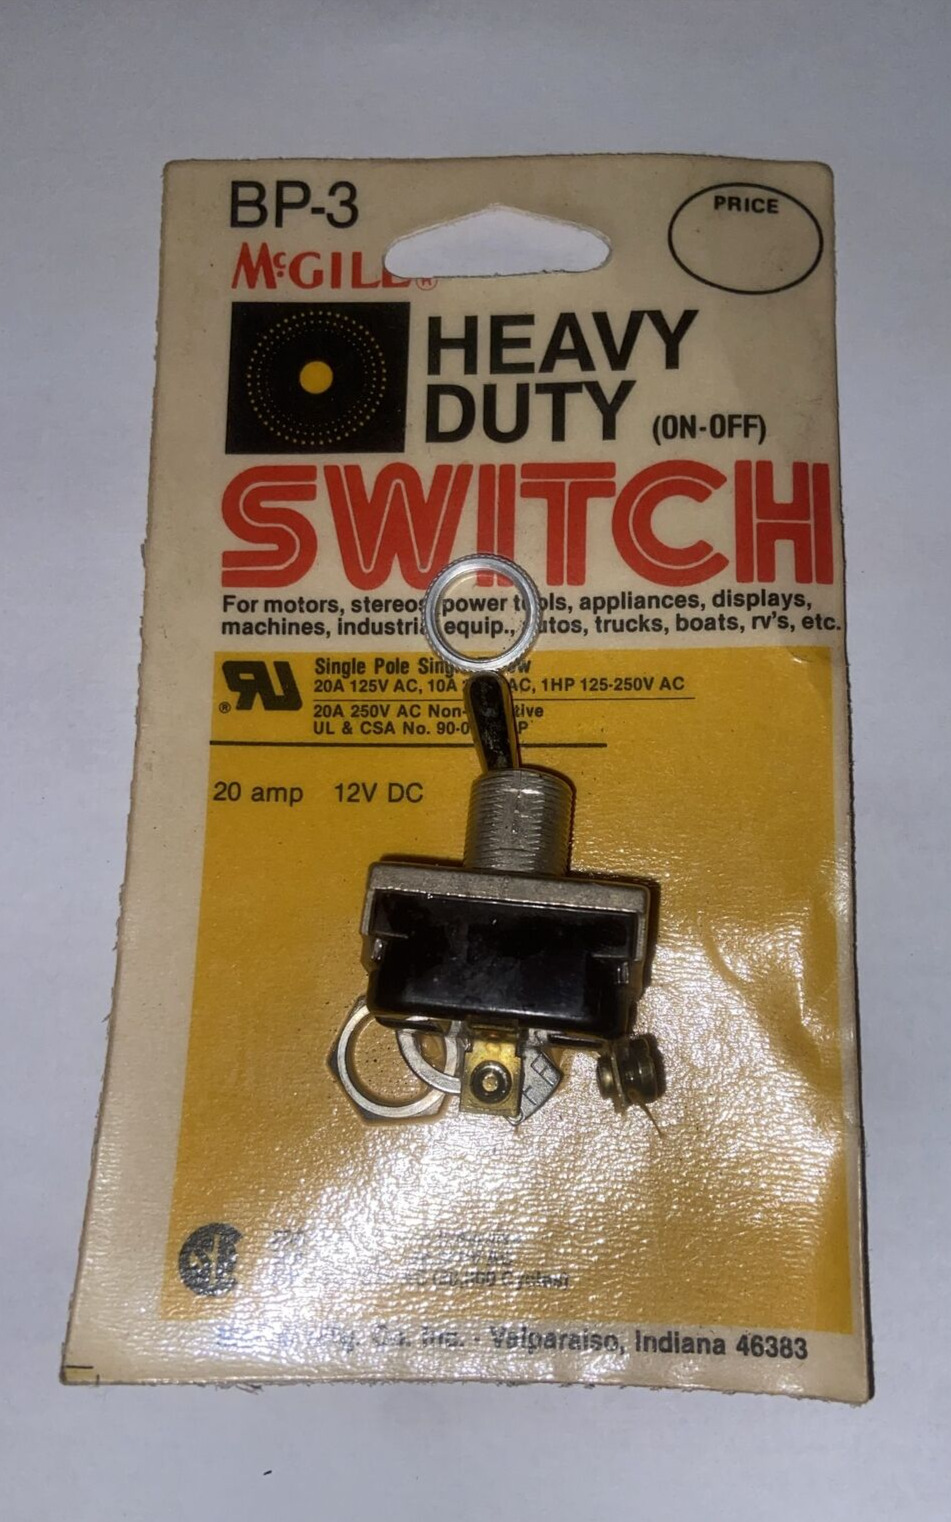 HEAVY DUTY ON/ OFF TOGGLE SWITCH - MCGILL BP-3 AMP 20 amp 12v DC NOS Indiana